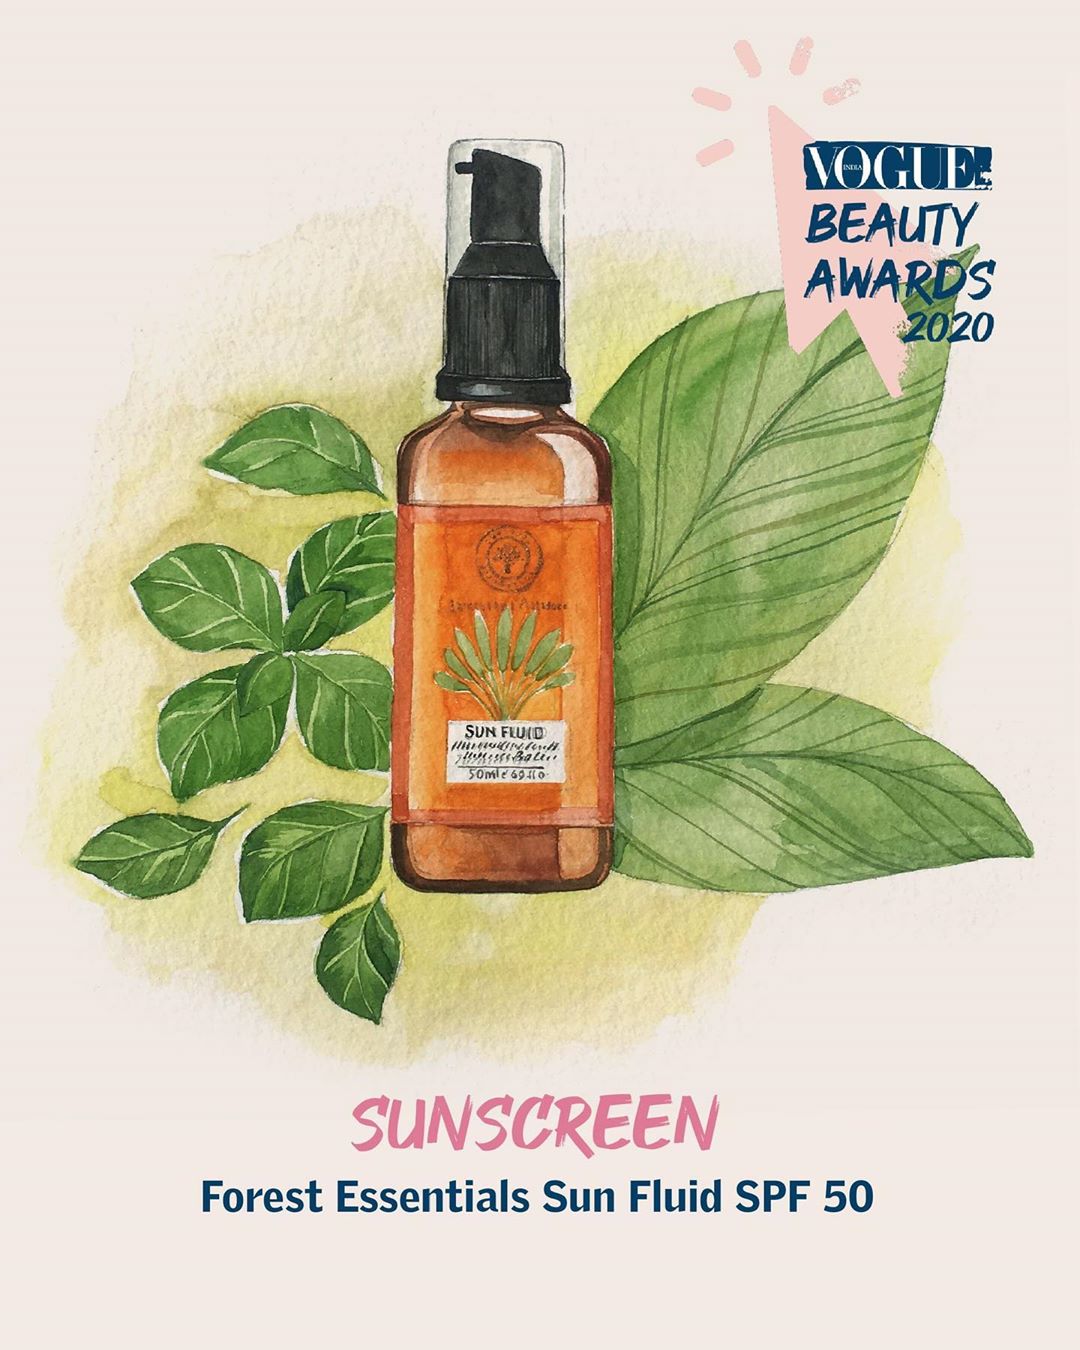 forestessentials - We are thrilled to announce that our bestselling #SunFluid with SPF 50|PA++ has been awarded as the best of skincare by @VogueIndia at the #Vogue Beauty Festival 2020. This formulat...